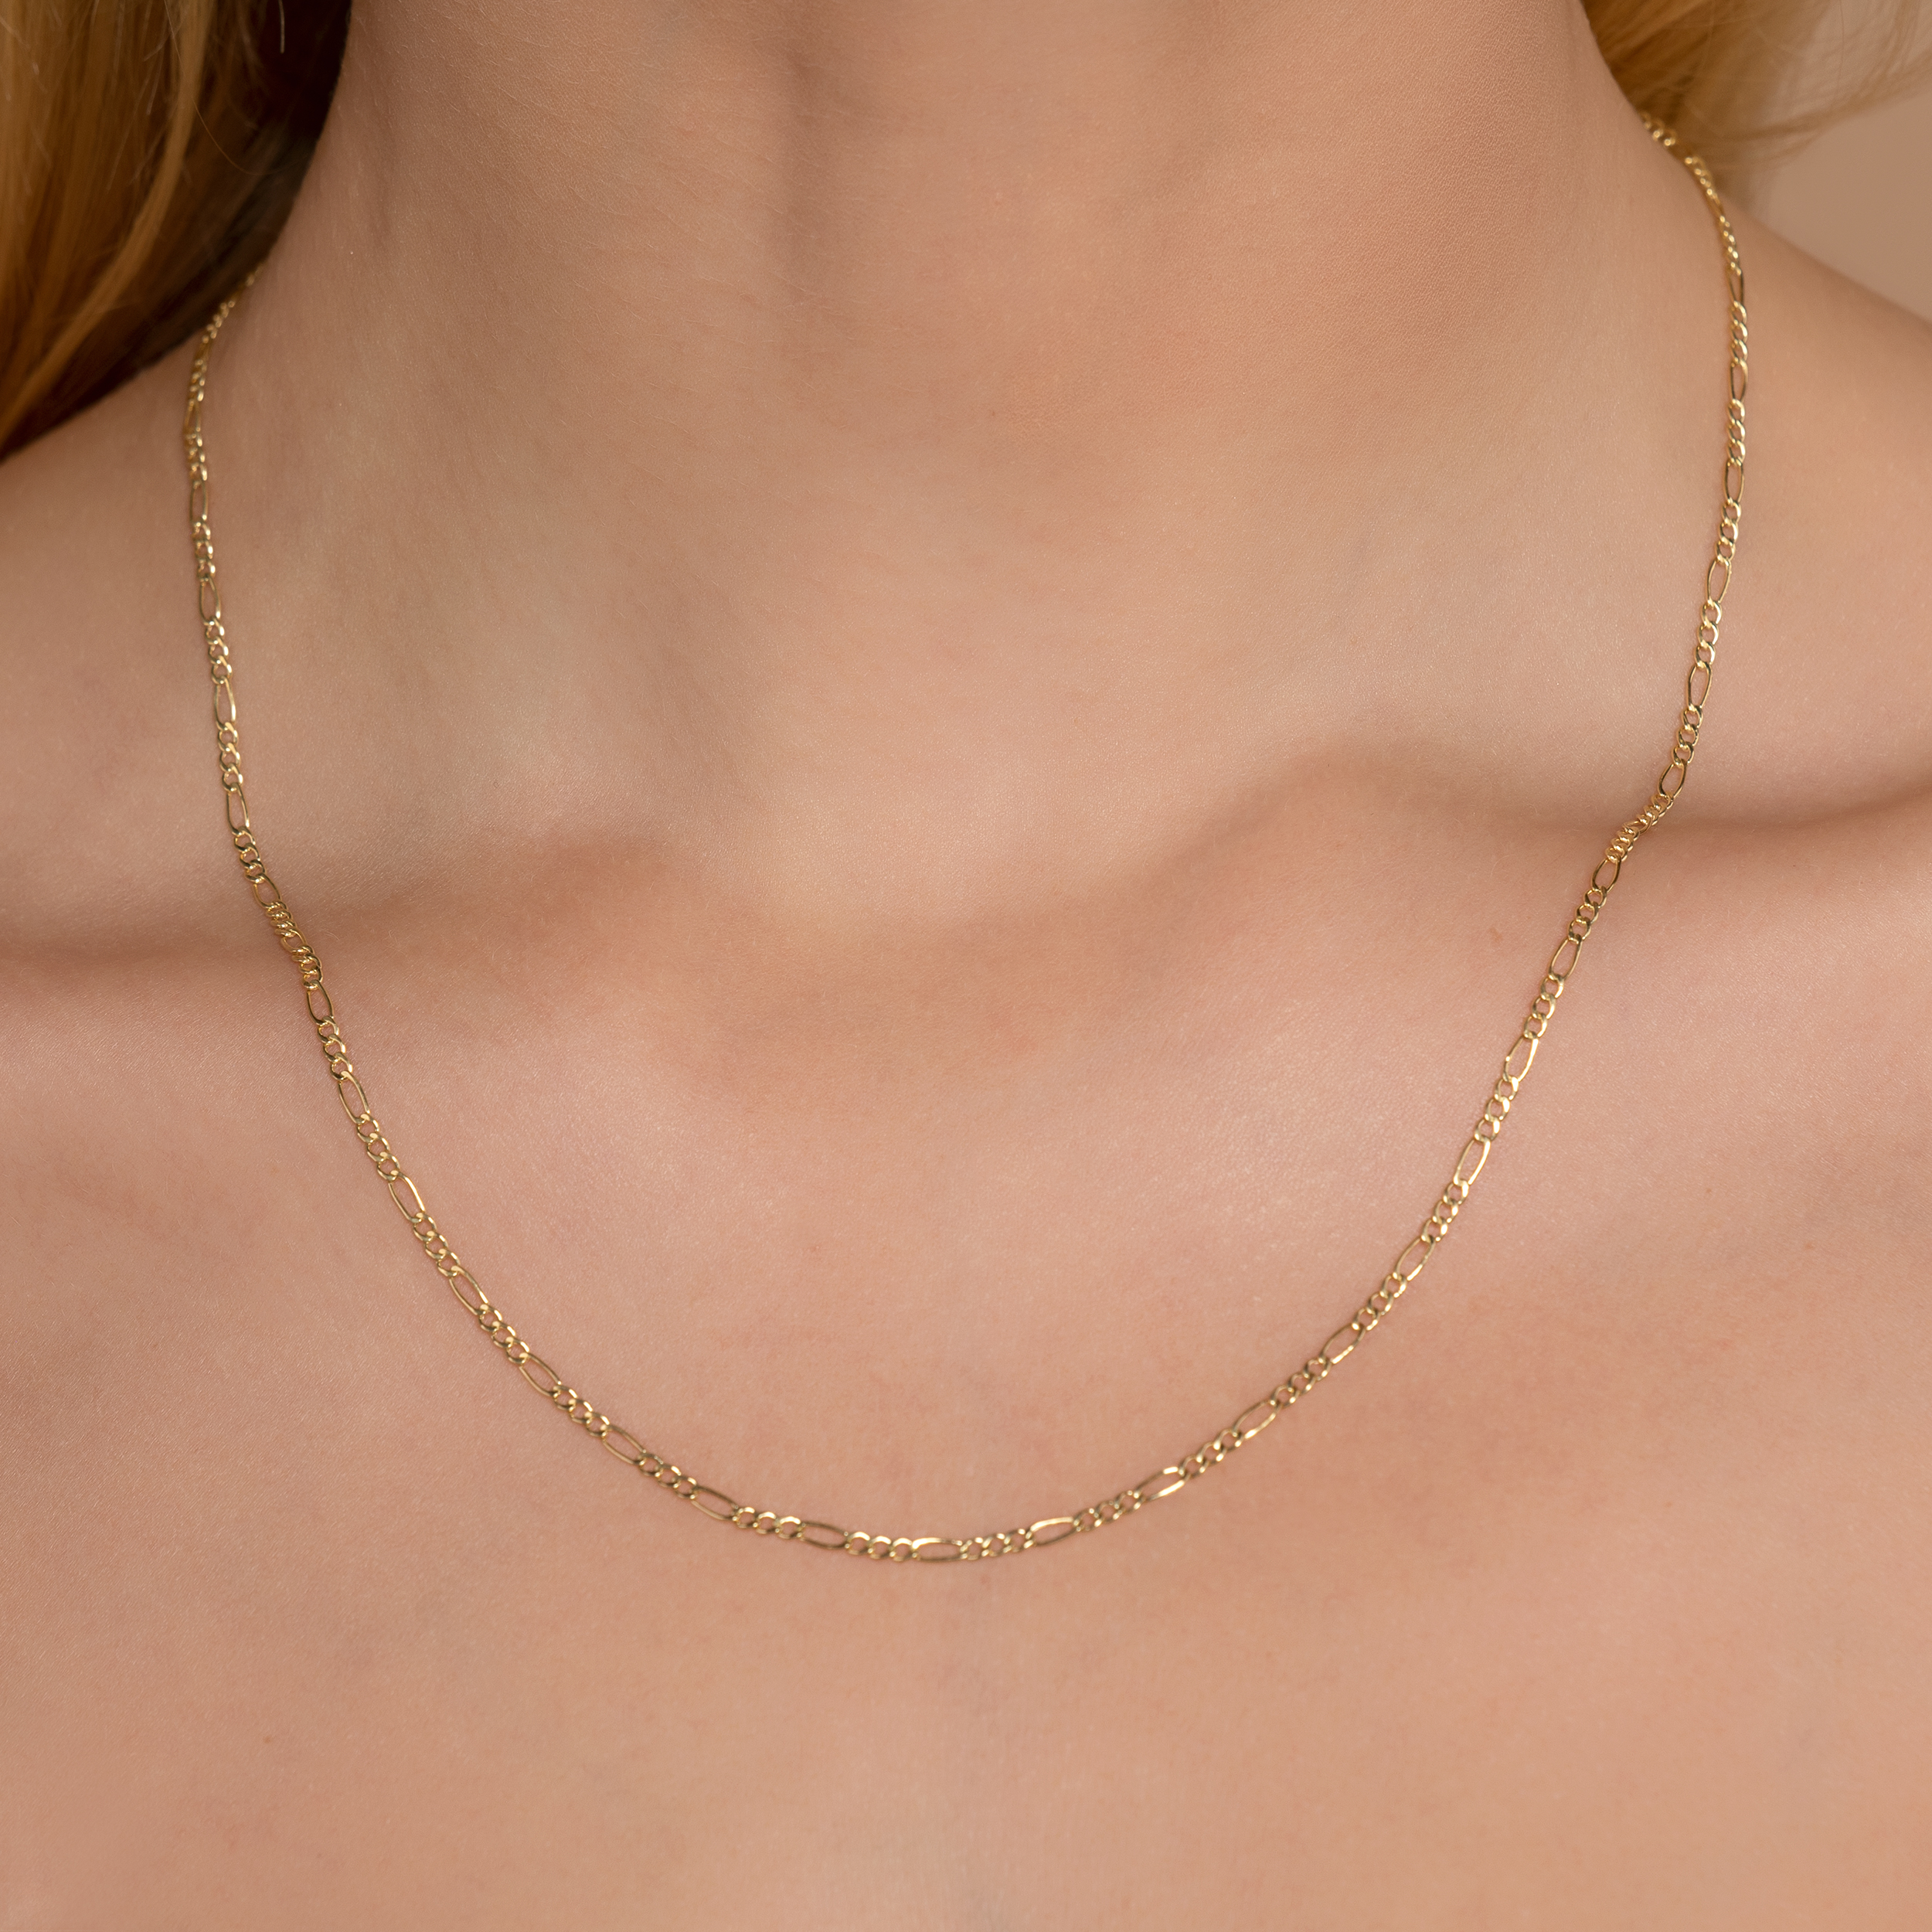 Pori Jewelers 14K Solid Gold 2.5MM Figaro Chain Necklace - image 3 of 6